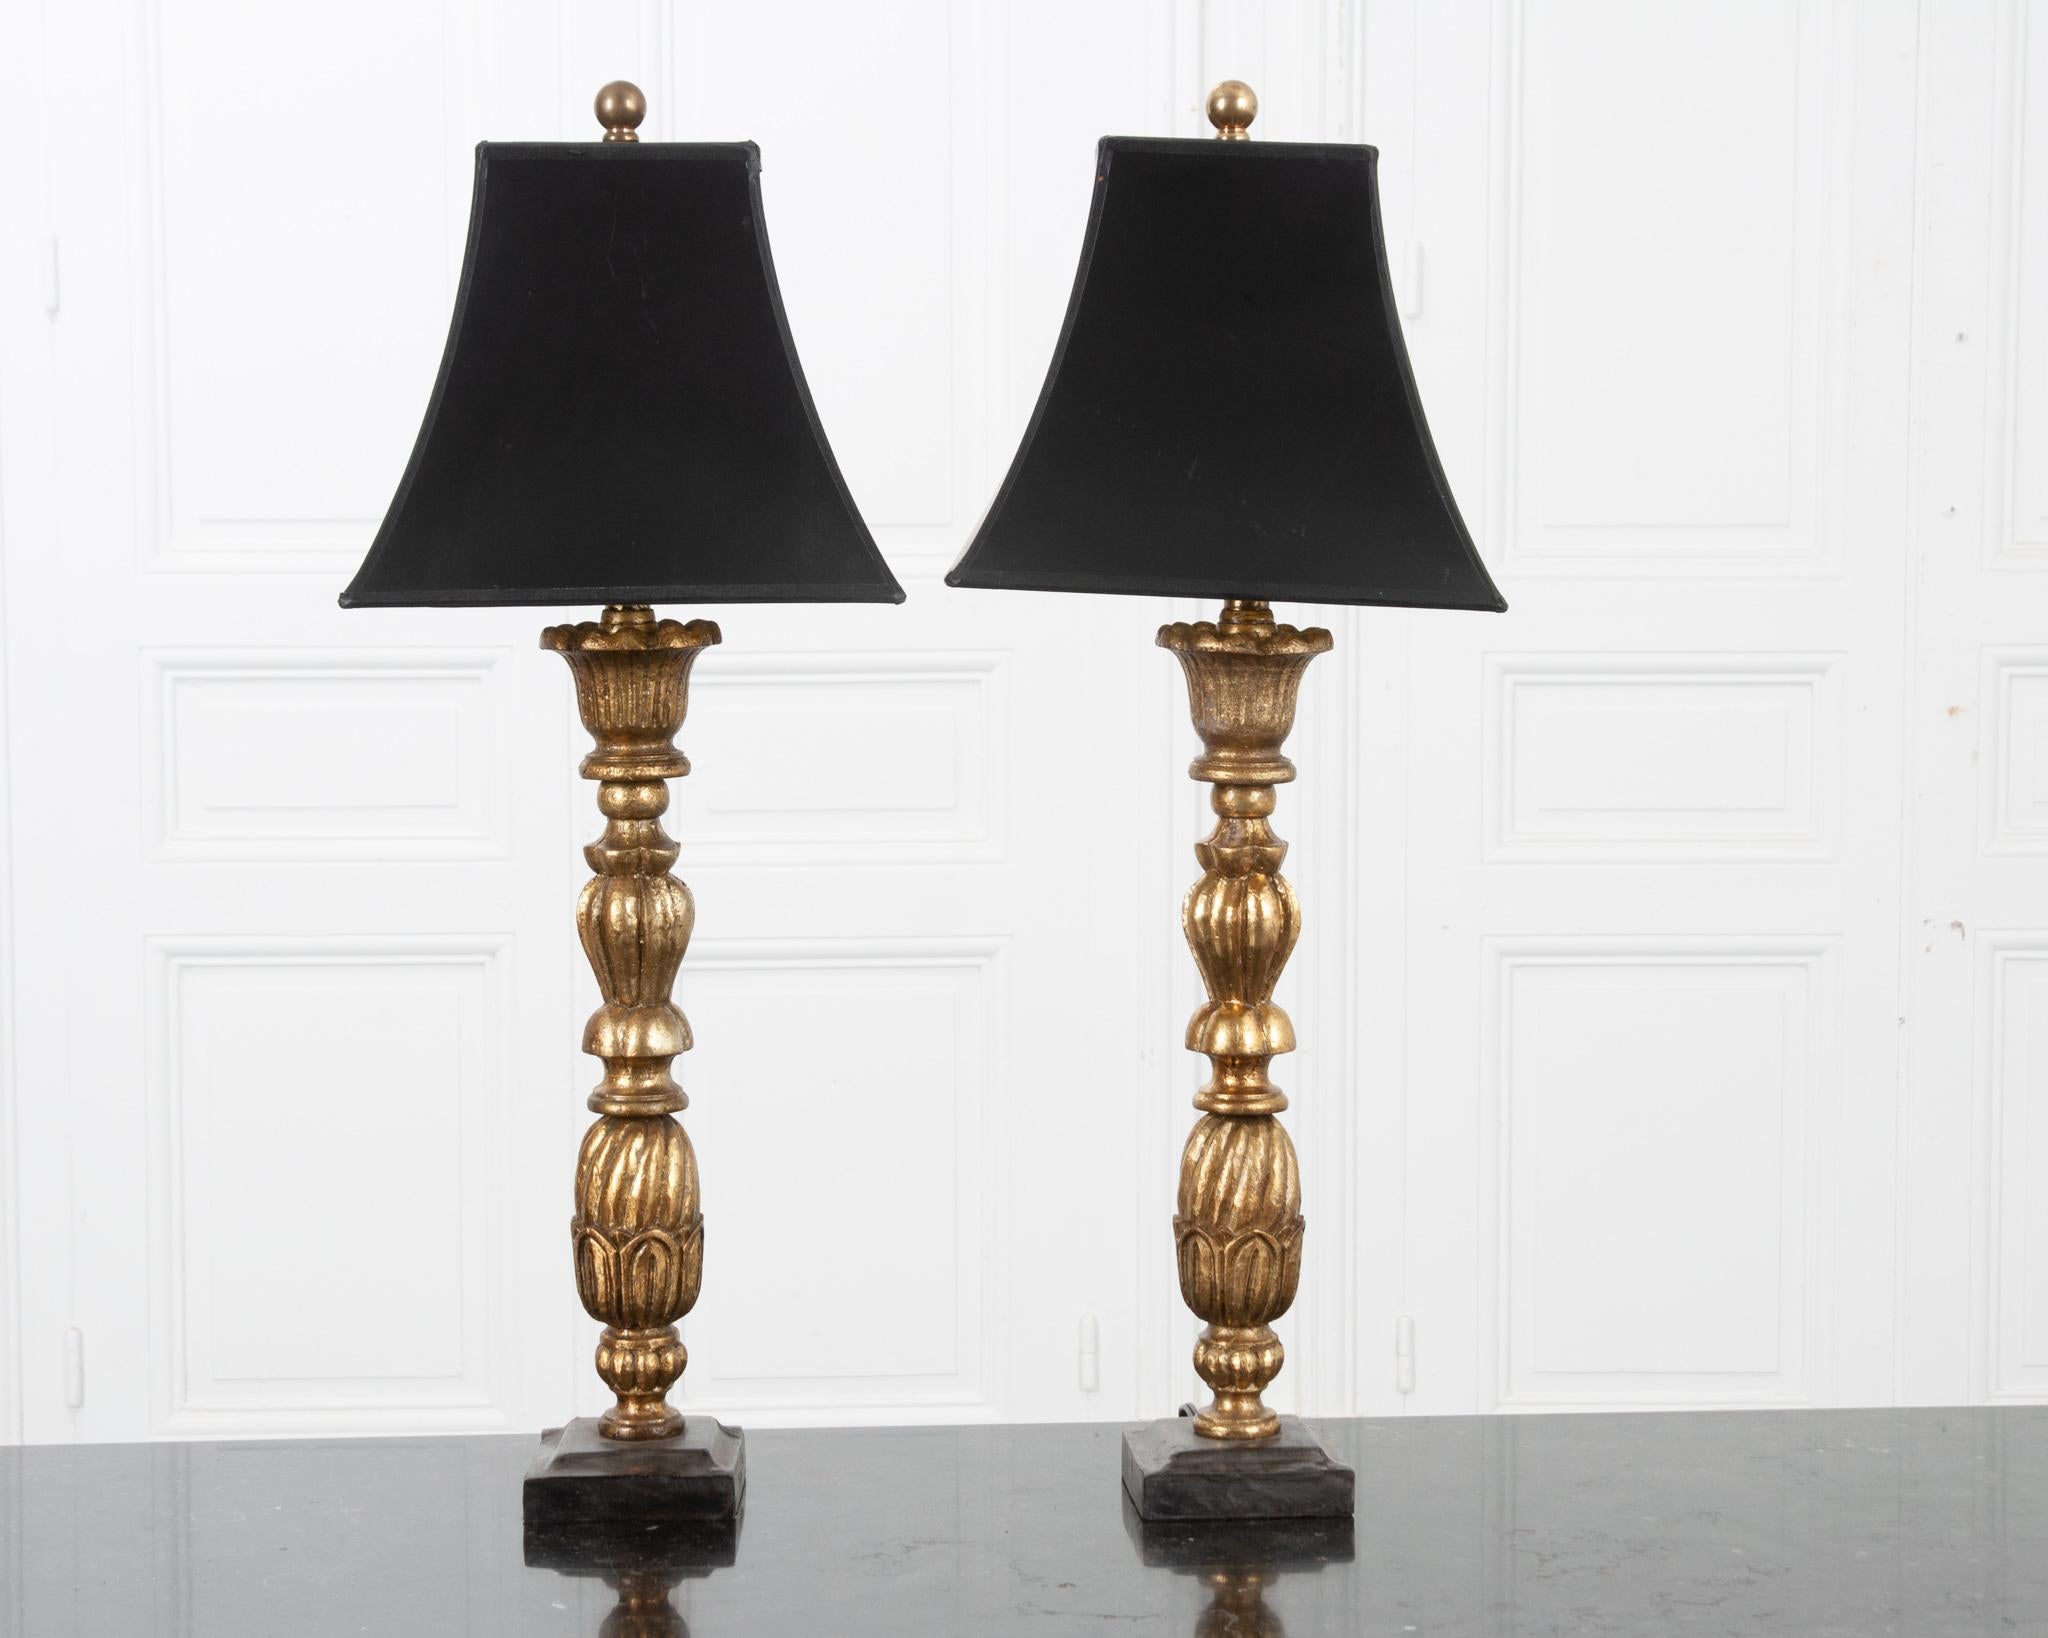 These hand carved library lamps are fixed with black paper shades that beautifully contrast the lustrous gold gilt bases. They feature deeply carved acorns and organic shapes on painted metal bases. Circular brass finials secure the shades. The